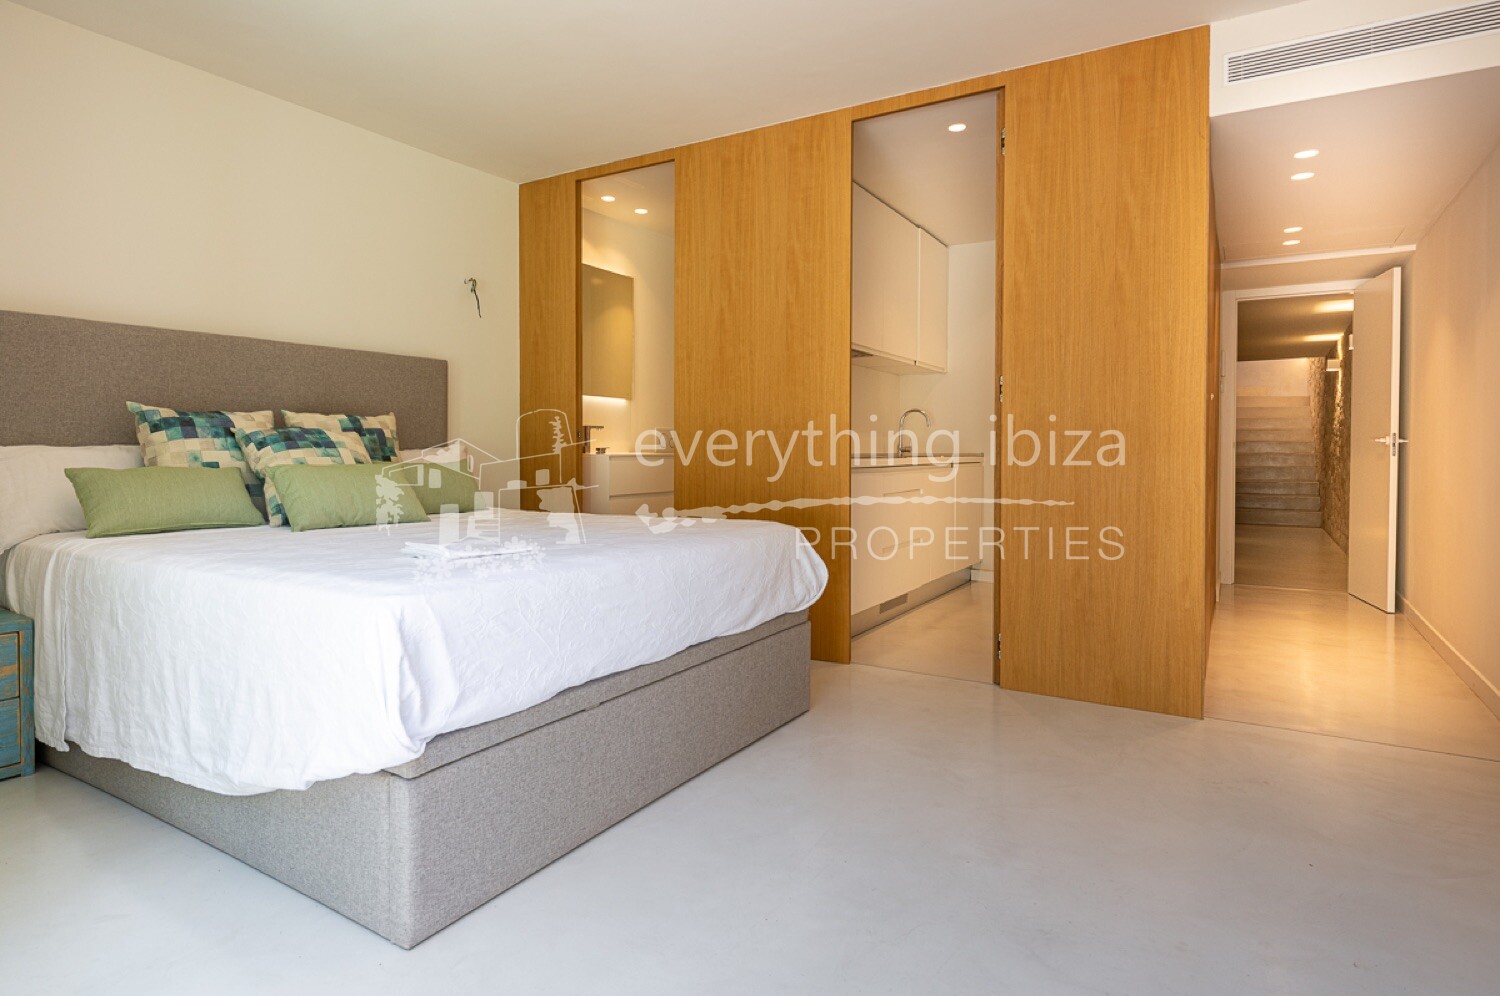 Exquisite Modern Villa with Tourist License, ref. 1391, for sale in Ibiza by everything ibiza Properties